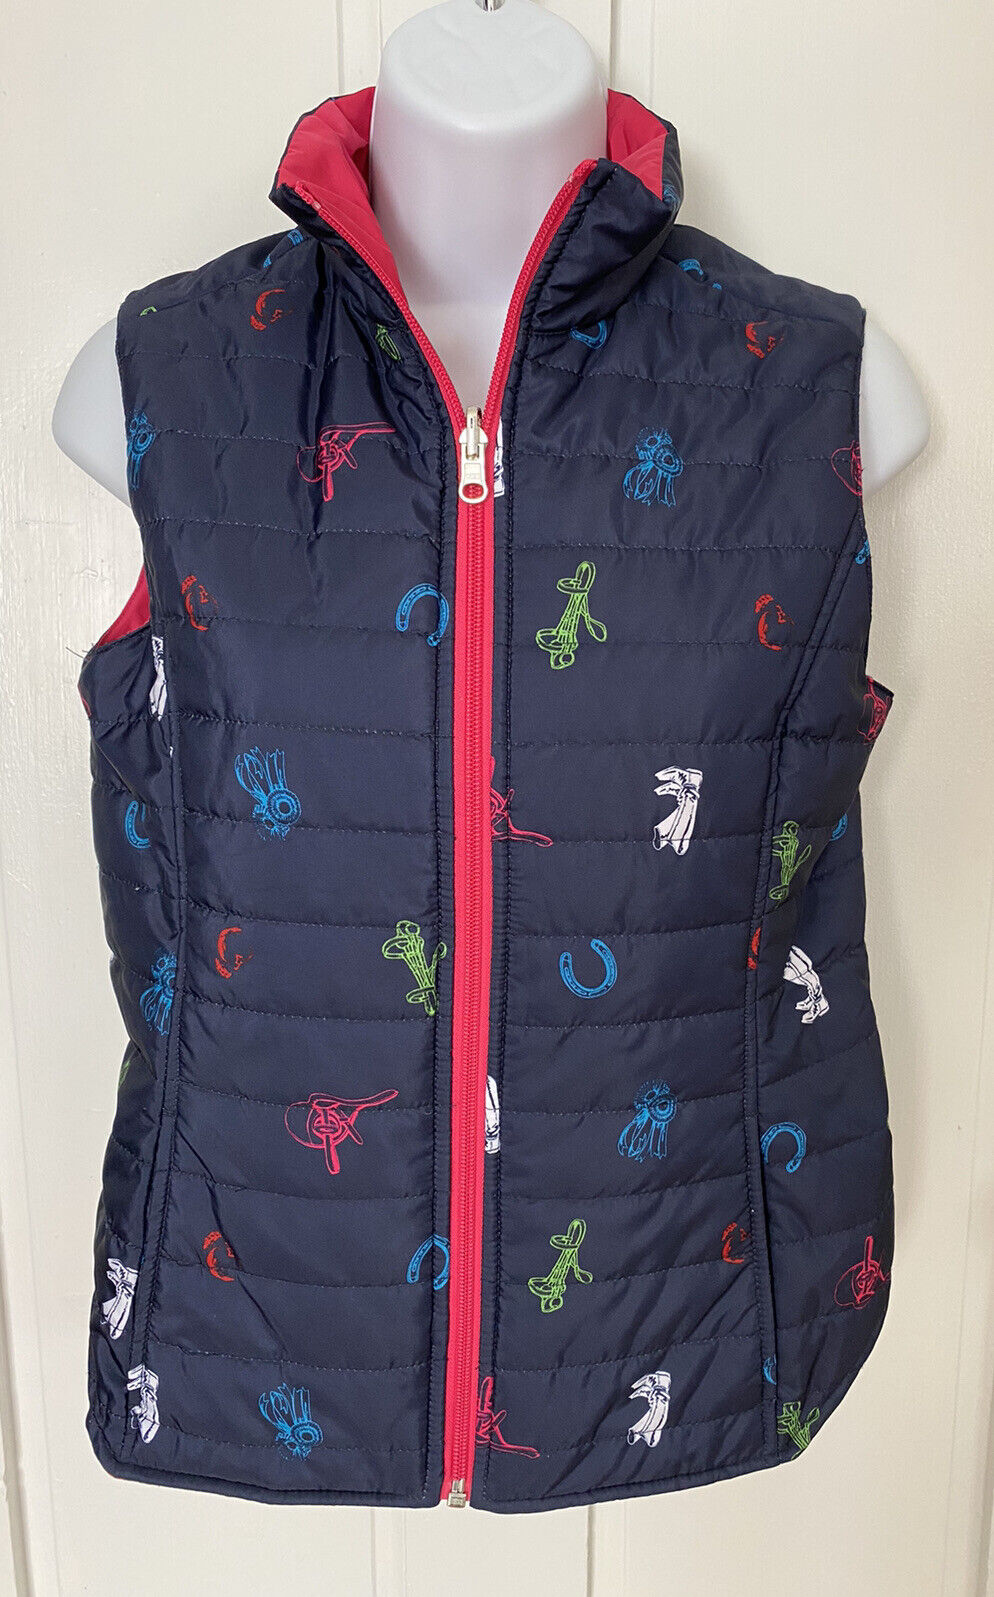 Ariat Vest Equestrian Theme Horse Riding Girls Youth Xl Winter Puffer